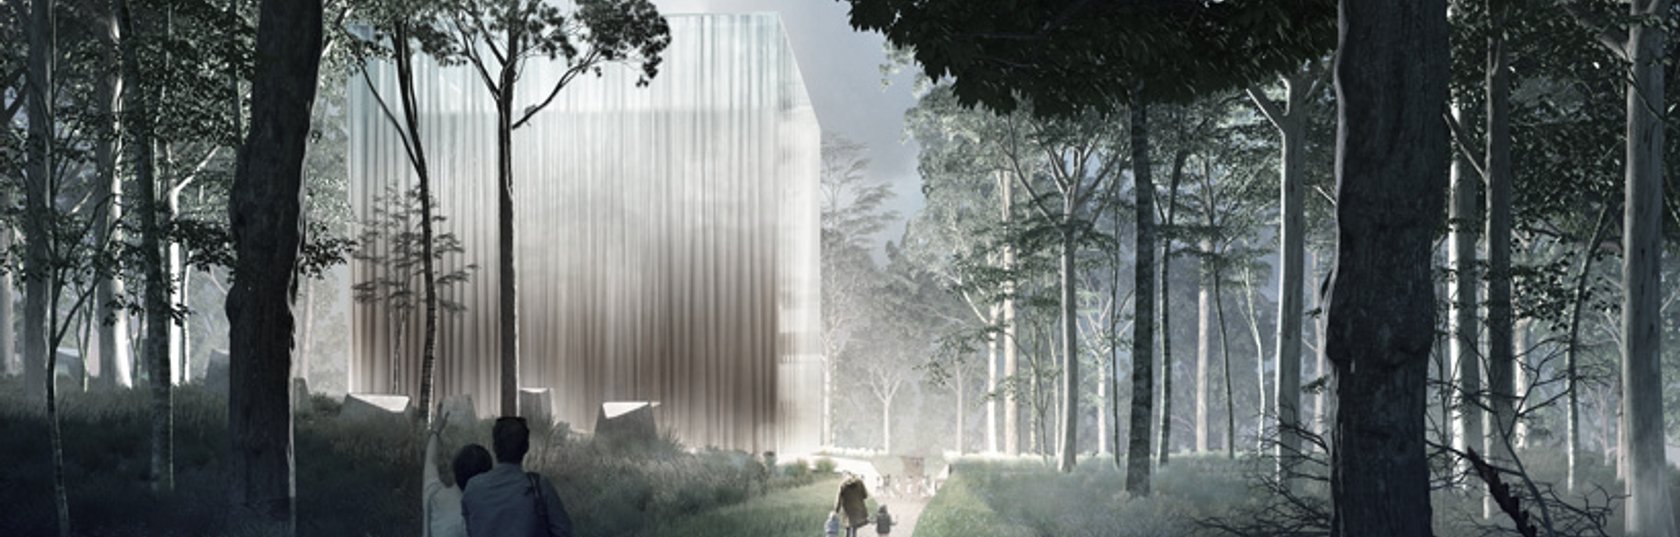 CHROFI wins Australian Conservatory Contest with "hovering cube" Design